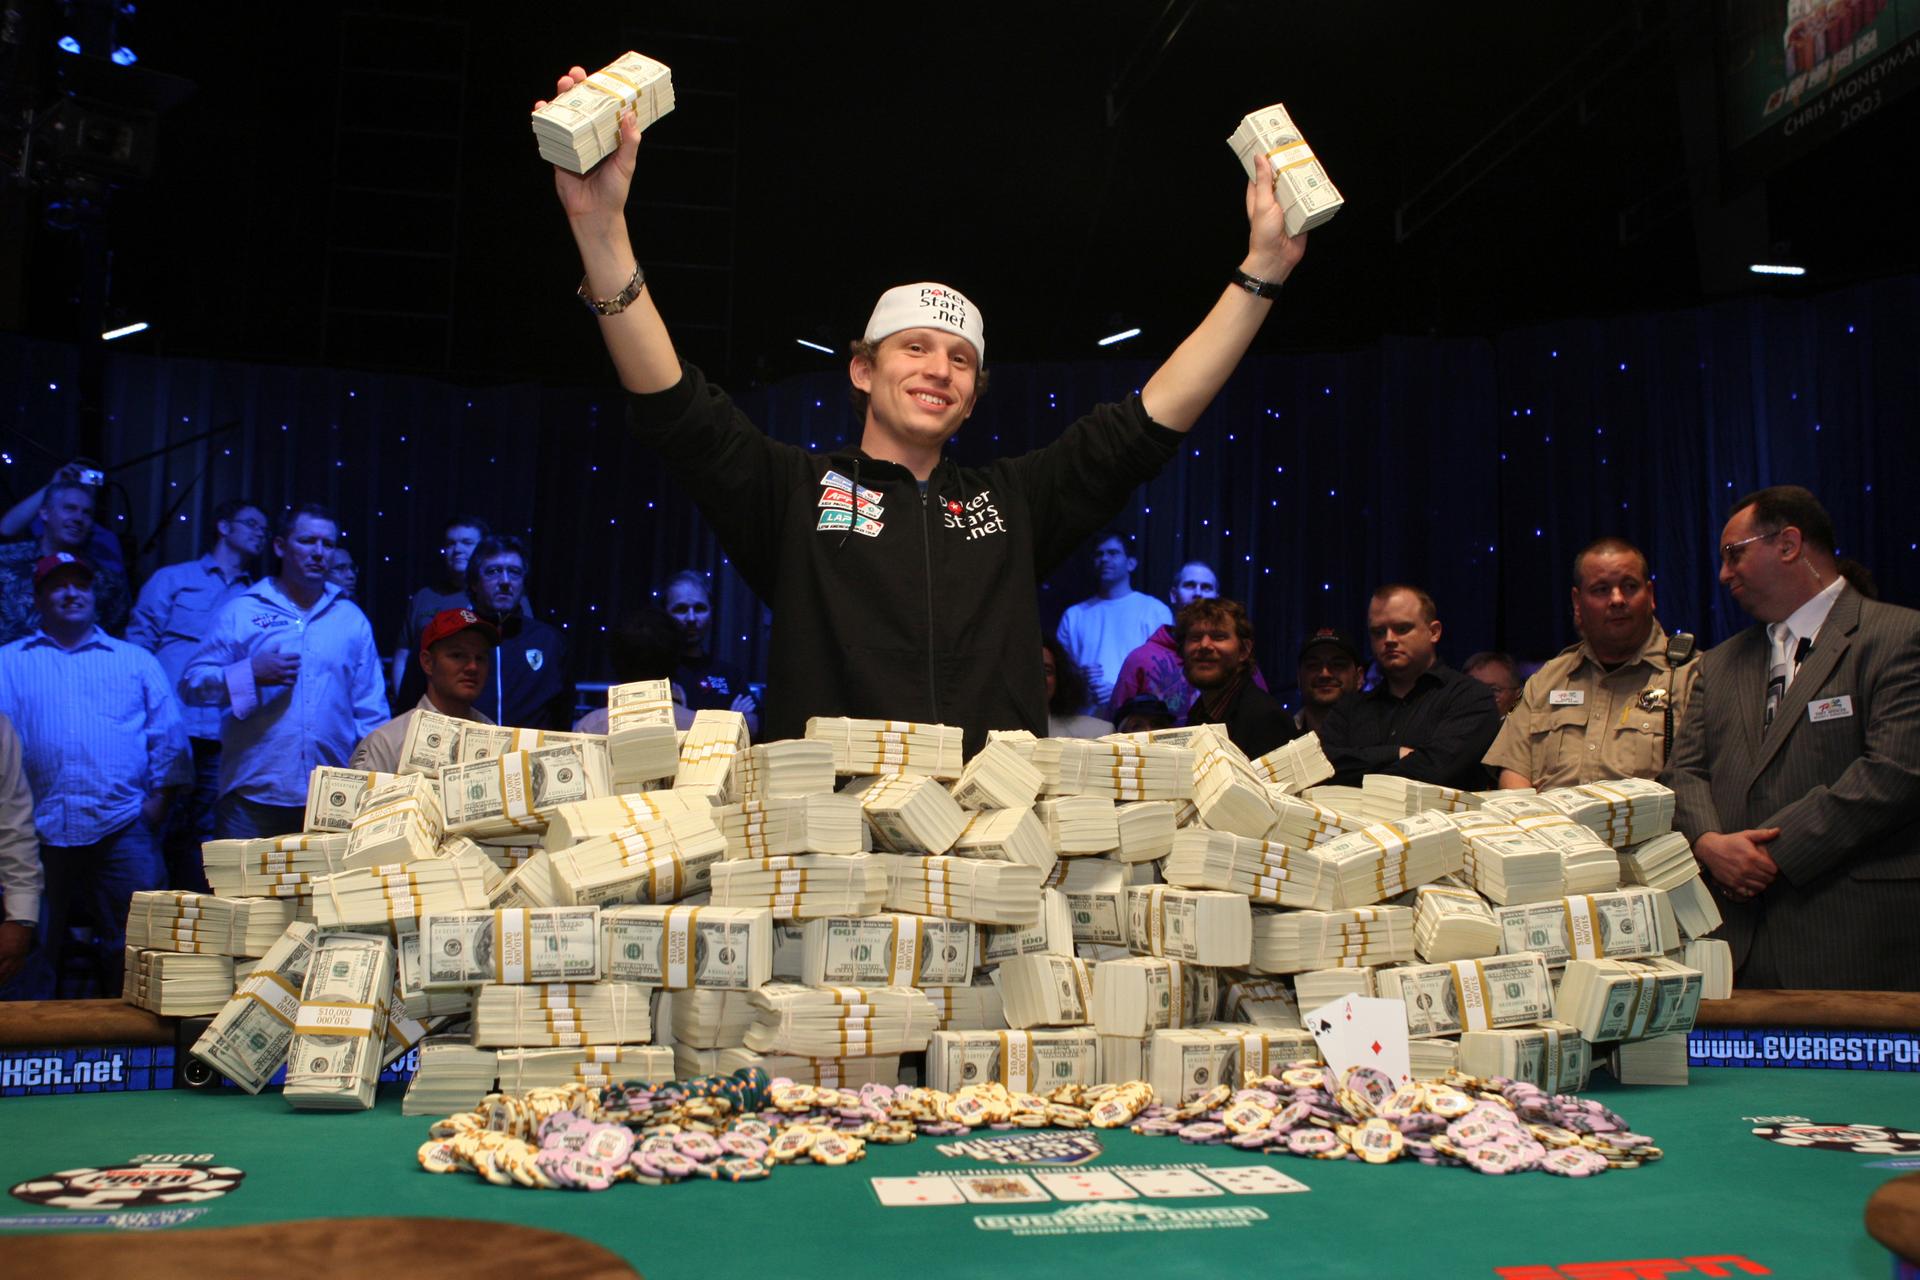 Peter Eastgate of Denmark celebrates after winning $9.15 million during the World Series of Poker at the Rio Hotel and Casino in Las Vegas.